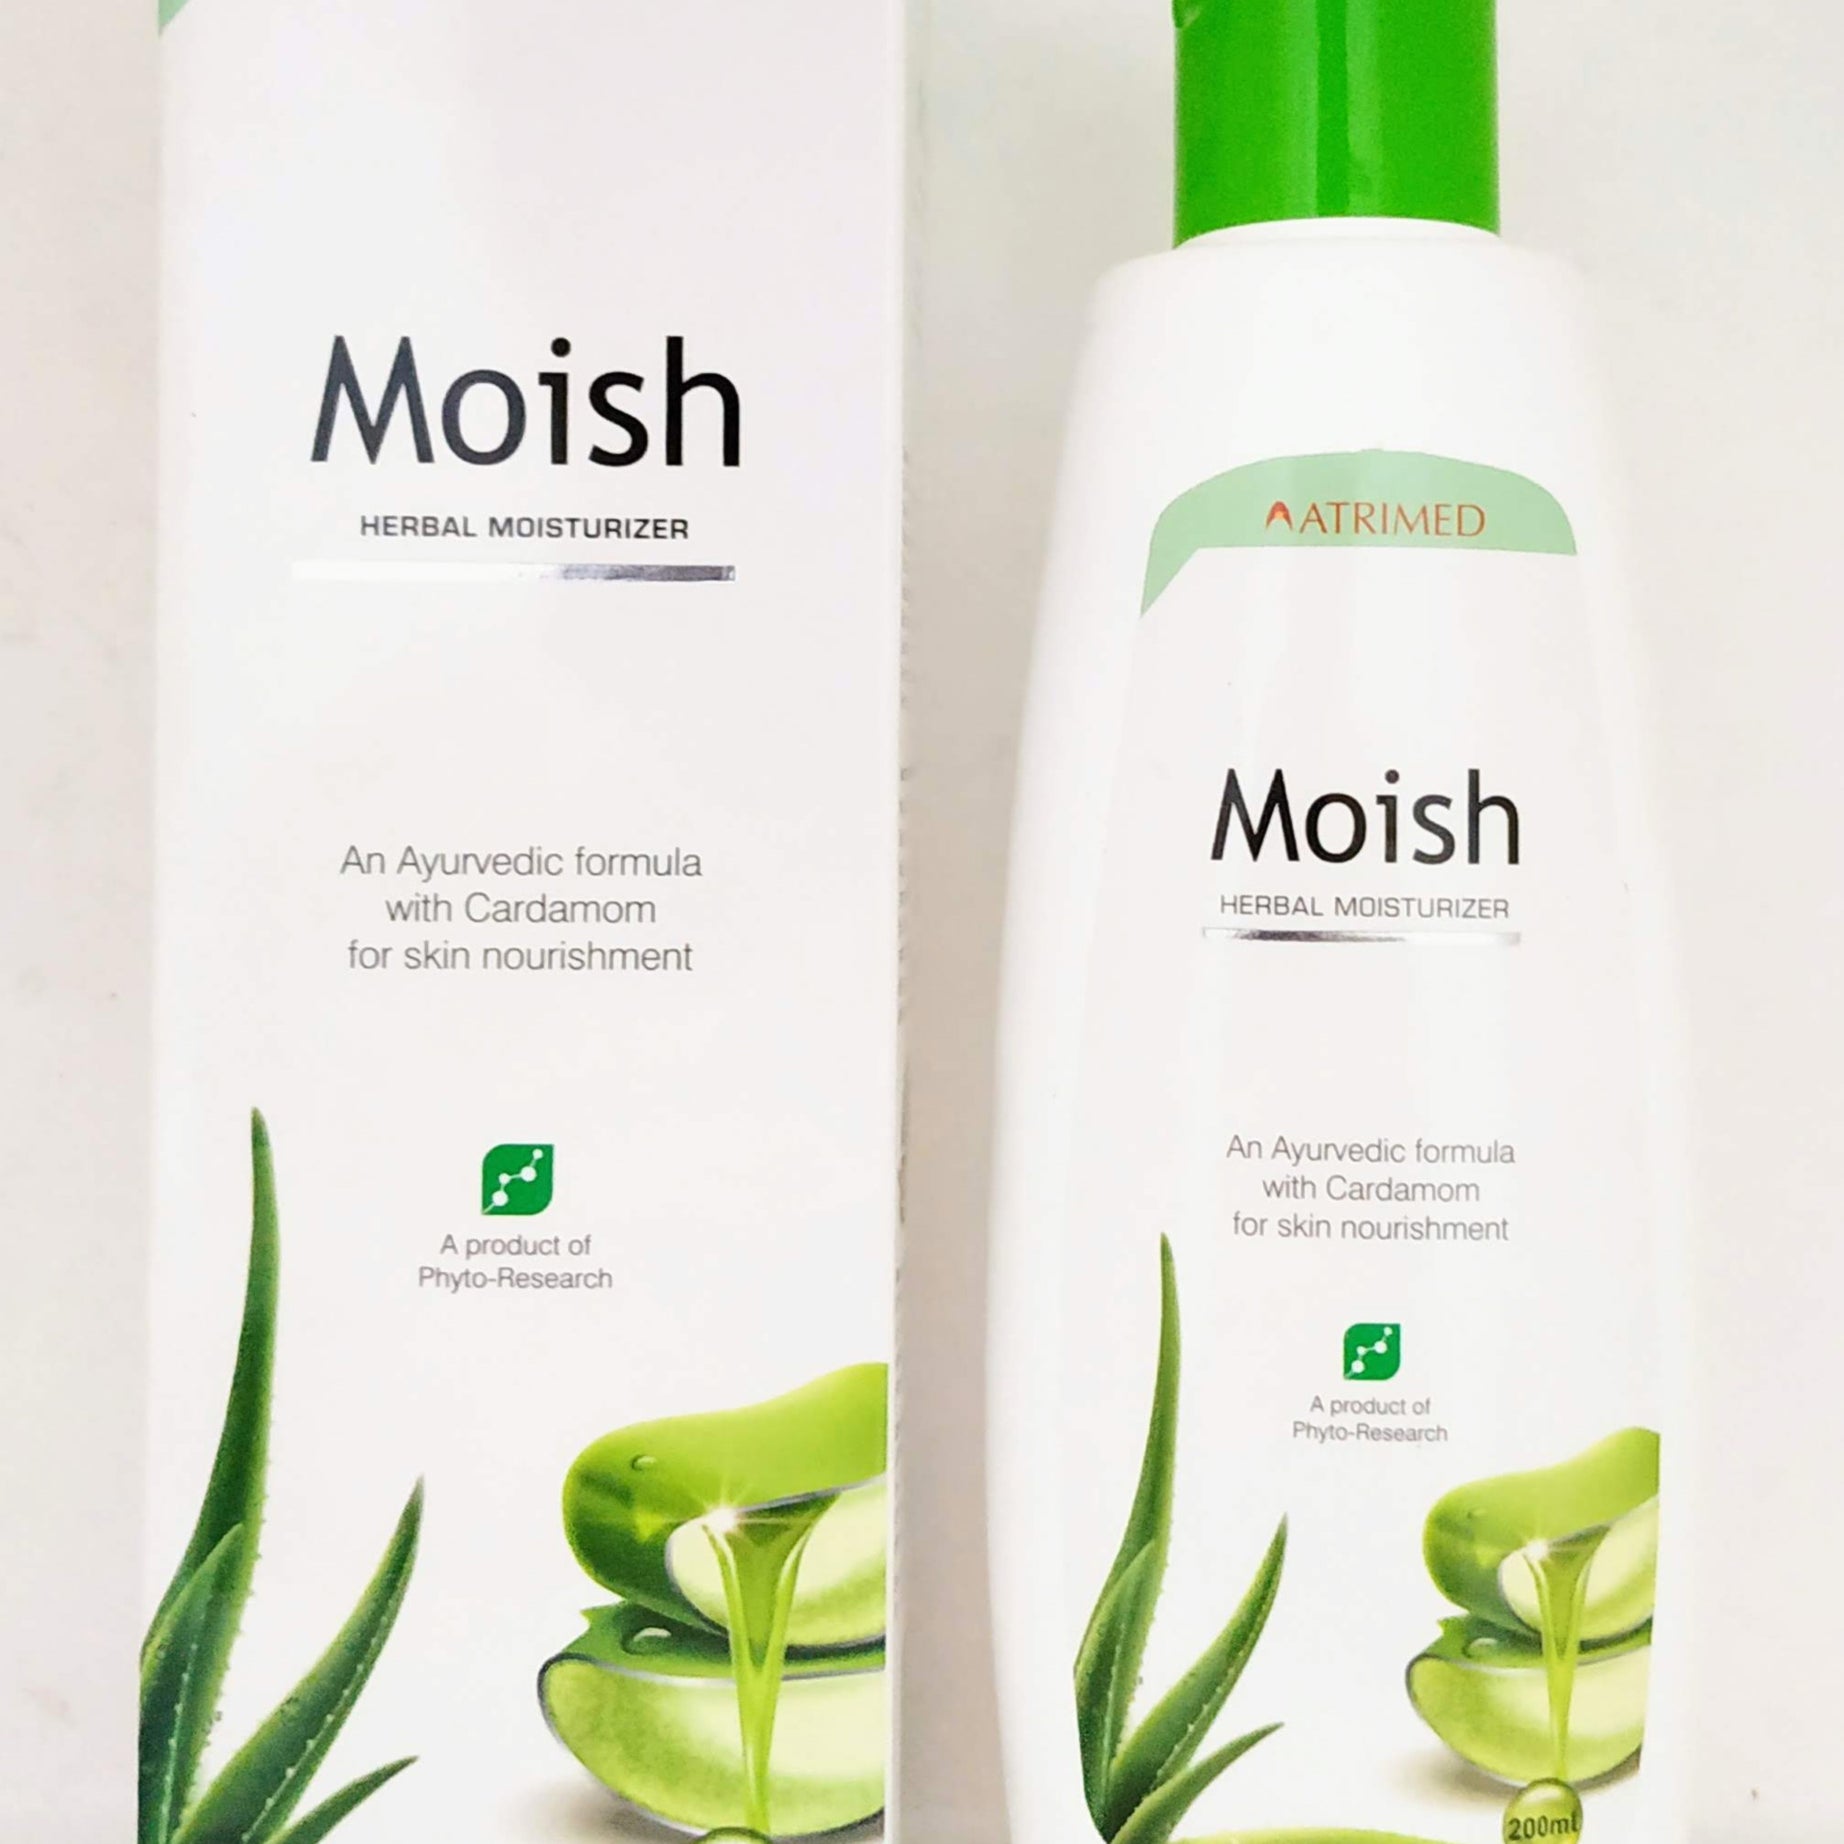 Shop Moish herbal moisturizer 200ml at price 200.00 from Atrimed Online - Ayush Care